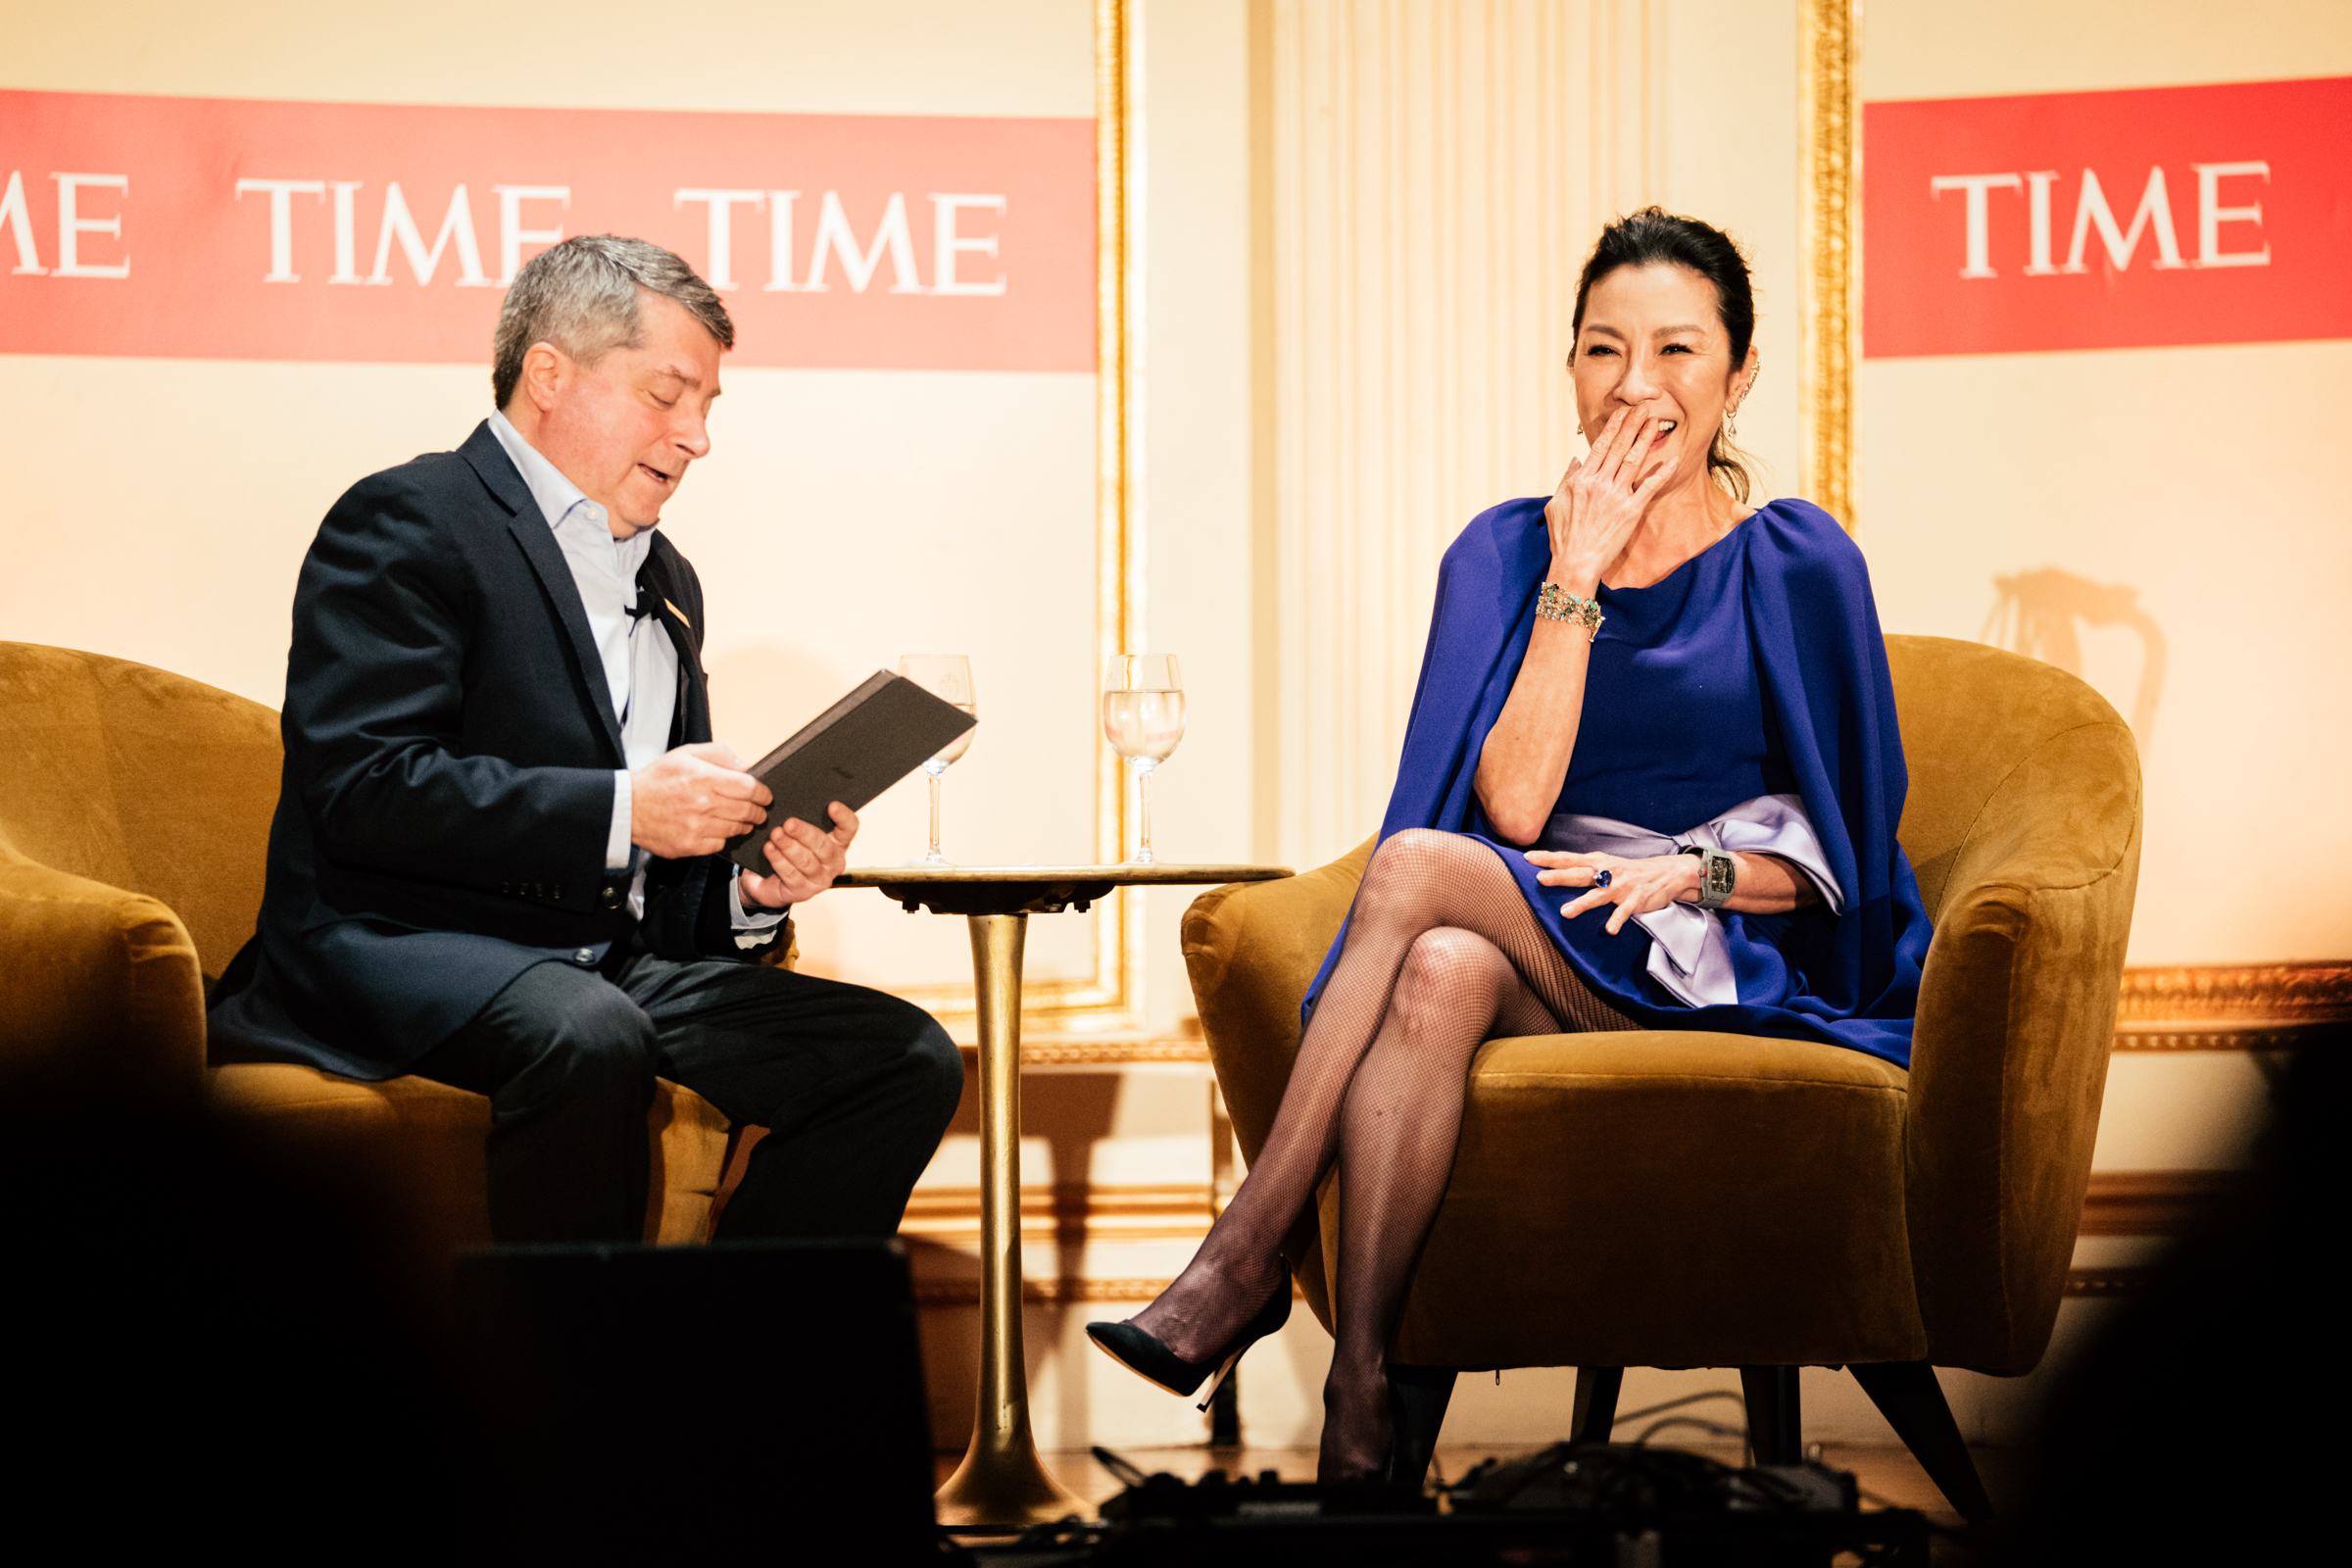 TIME’s 2022 Icon of the Year Michelle Yeoh onstage at the TIME 2022 Person of the Year reception, at The Plaza Hotel in New York City, on Dec. 8, 2022. (Poupay Jutharat for TIME)